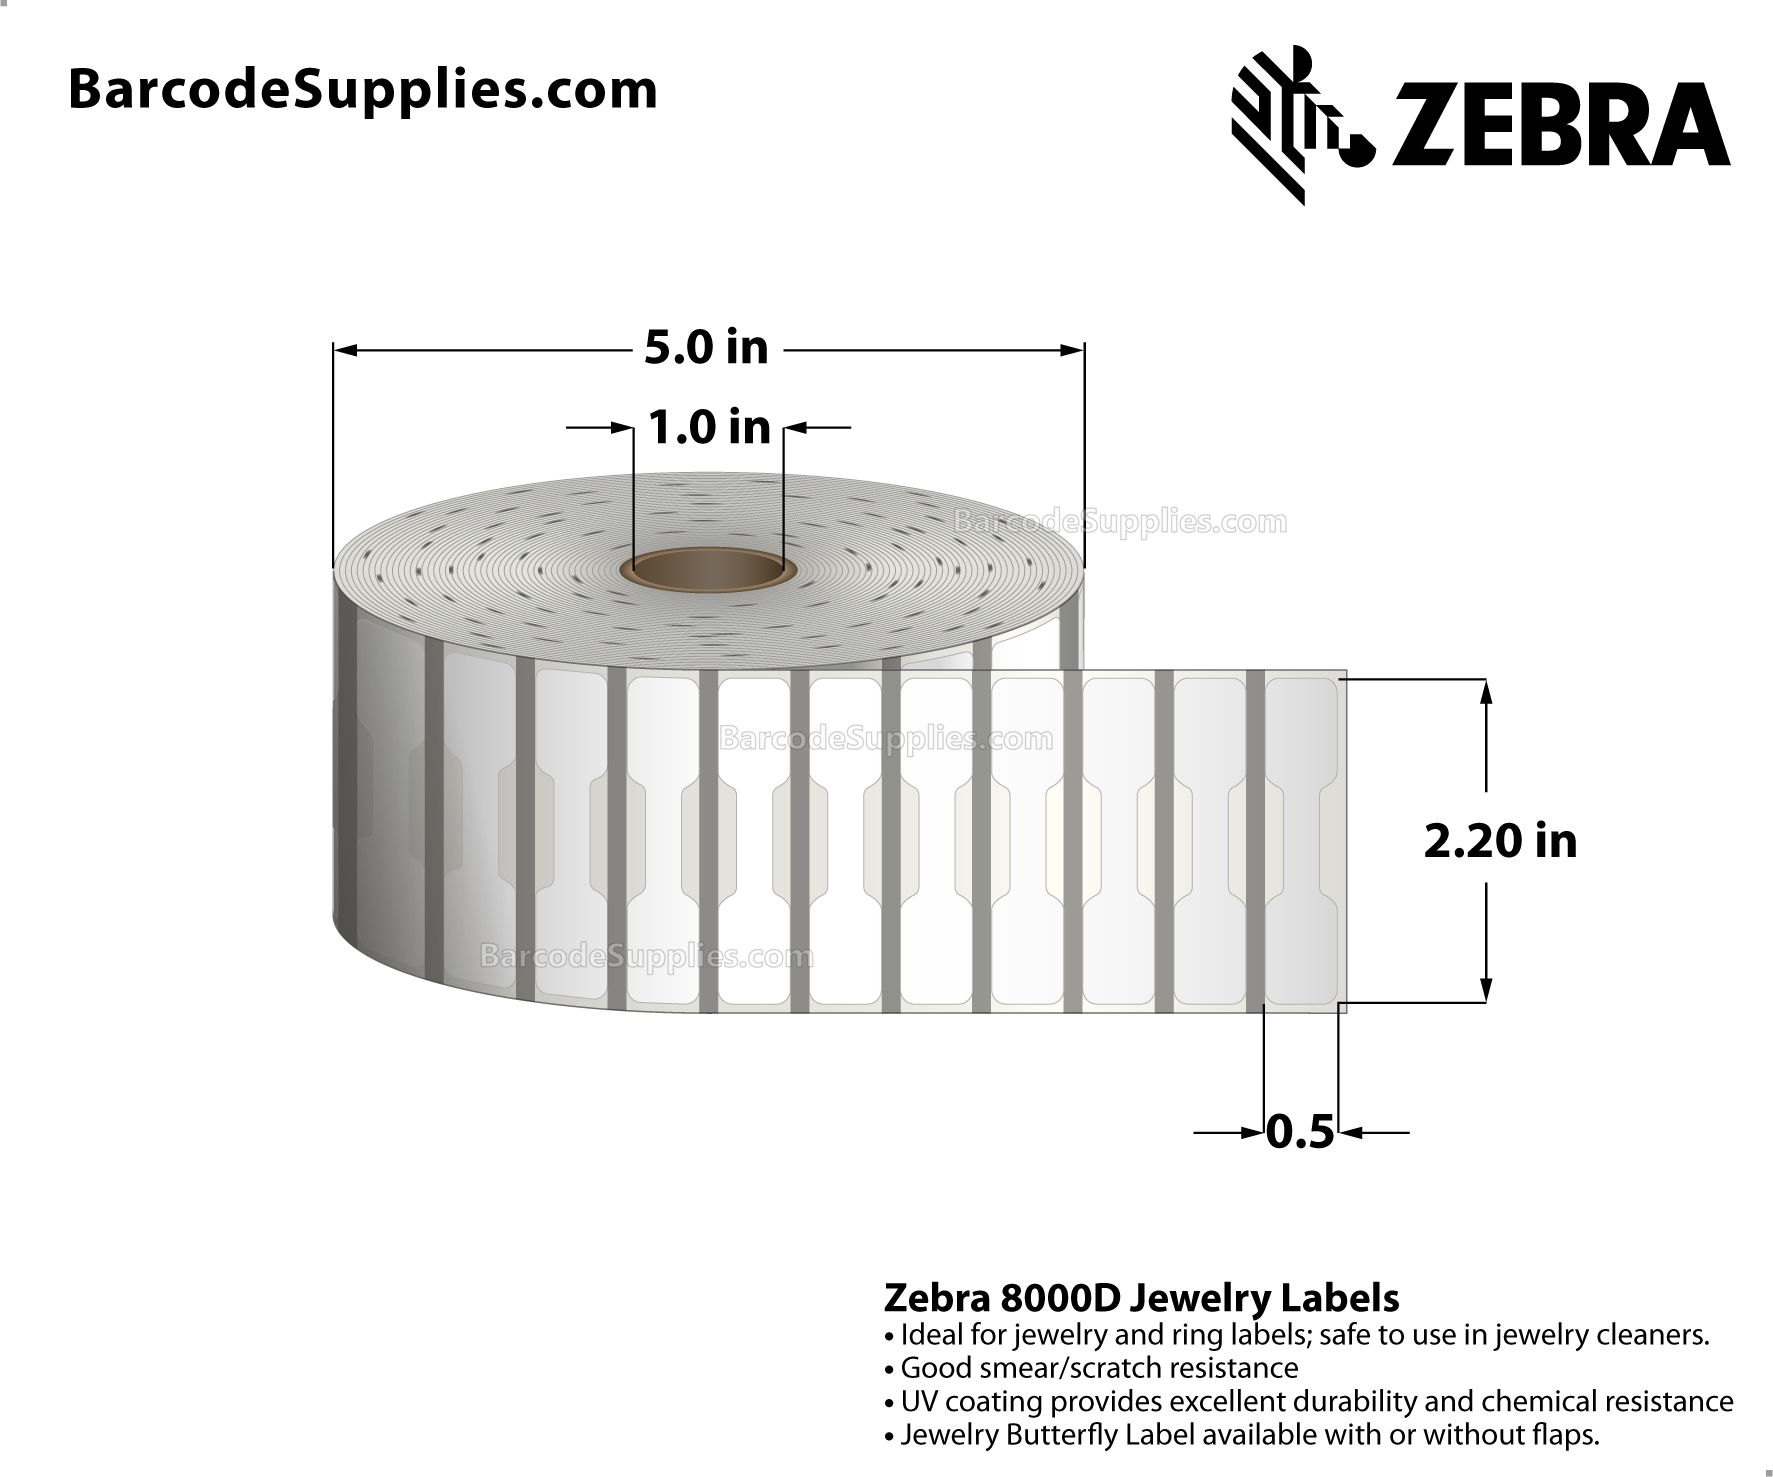 Zebra 2.20 x 0.50 Direct Thermal Labels 8000D Jewelry (Jewelry Butterfly  Label w/o flaps) 1" Core Rolls 21060 Labels